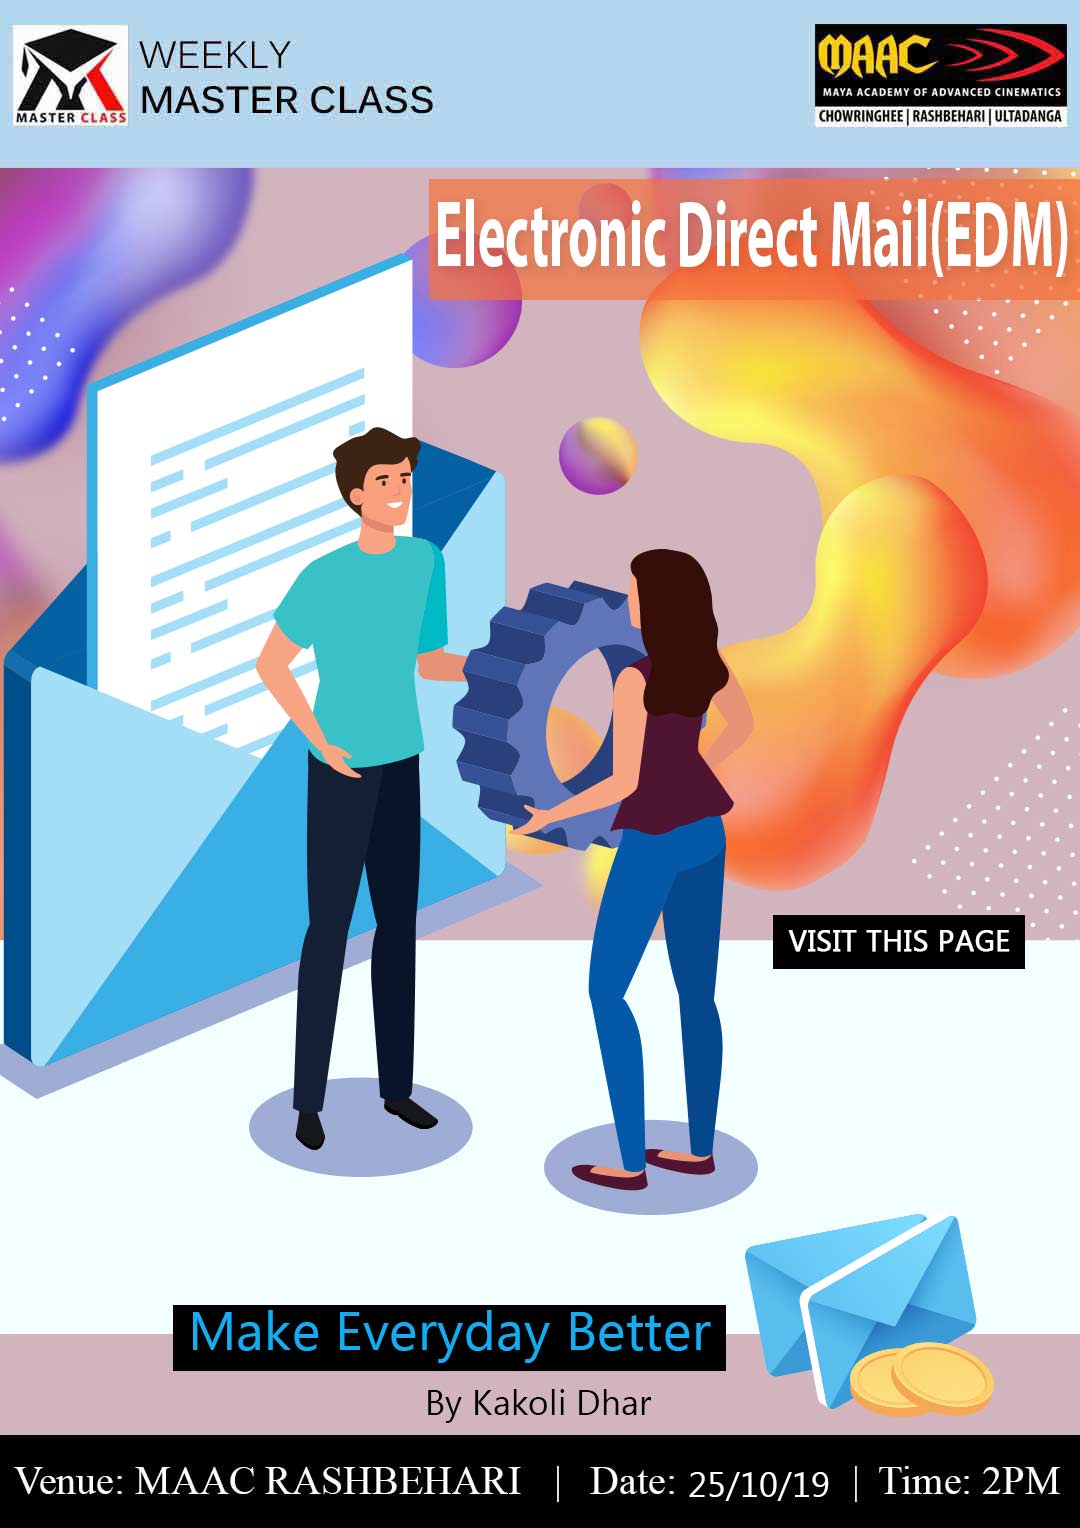 Weekly Master Class on Electronic Direct Mail